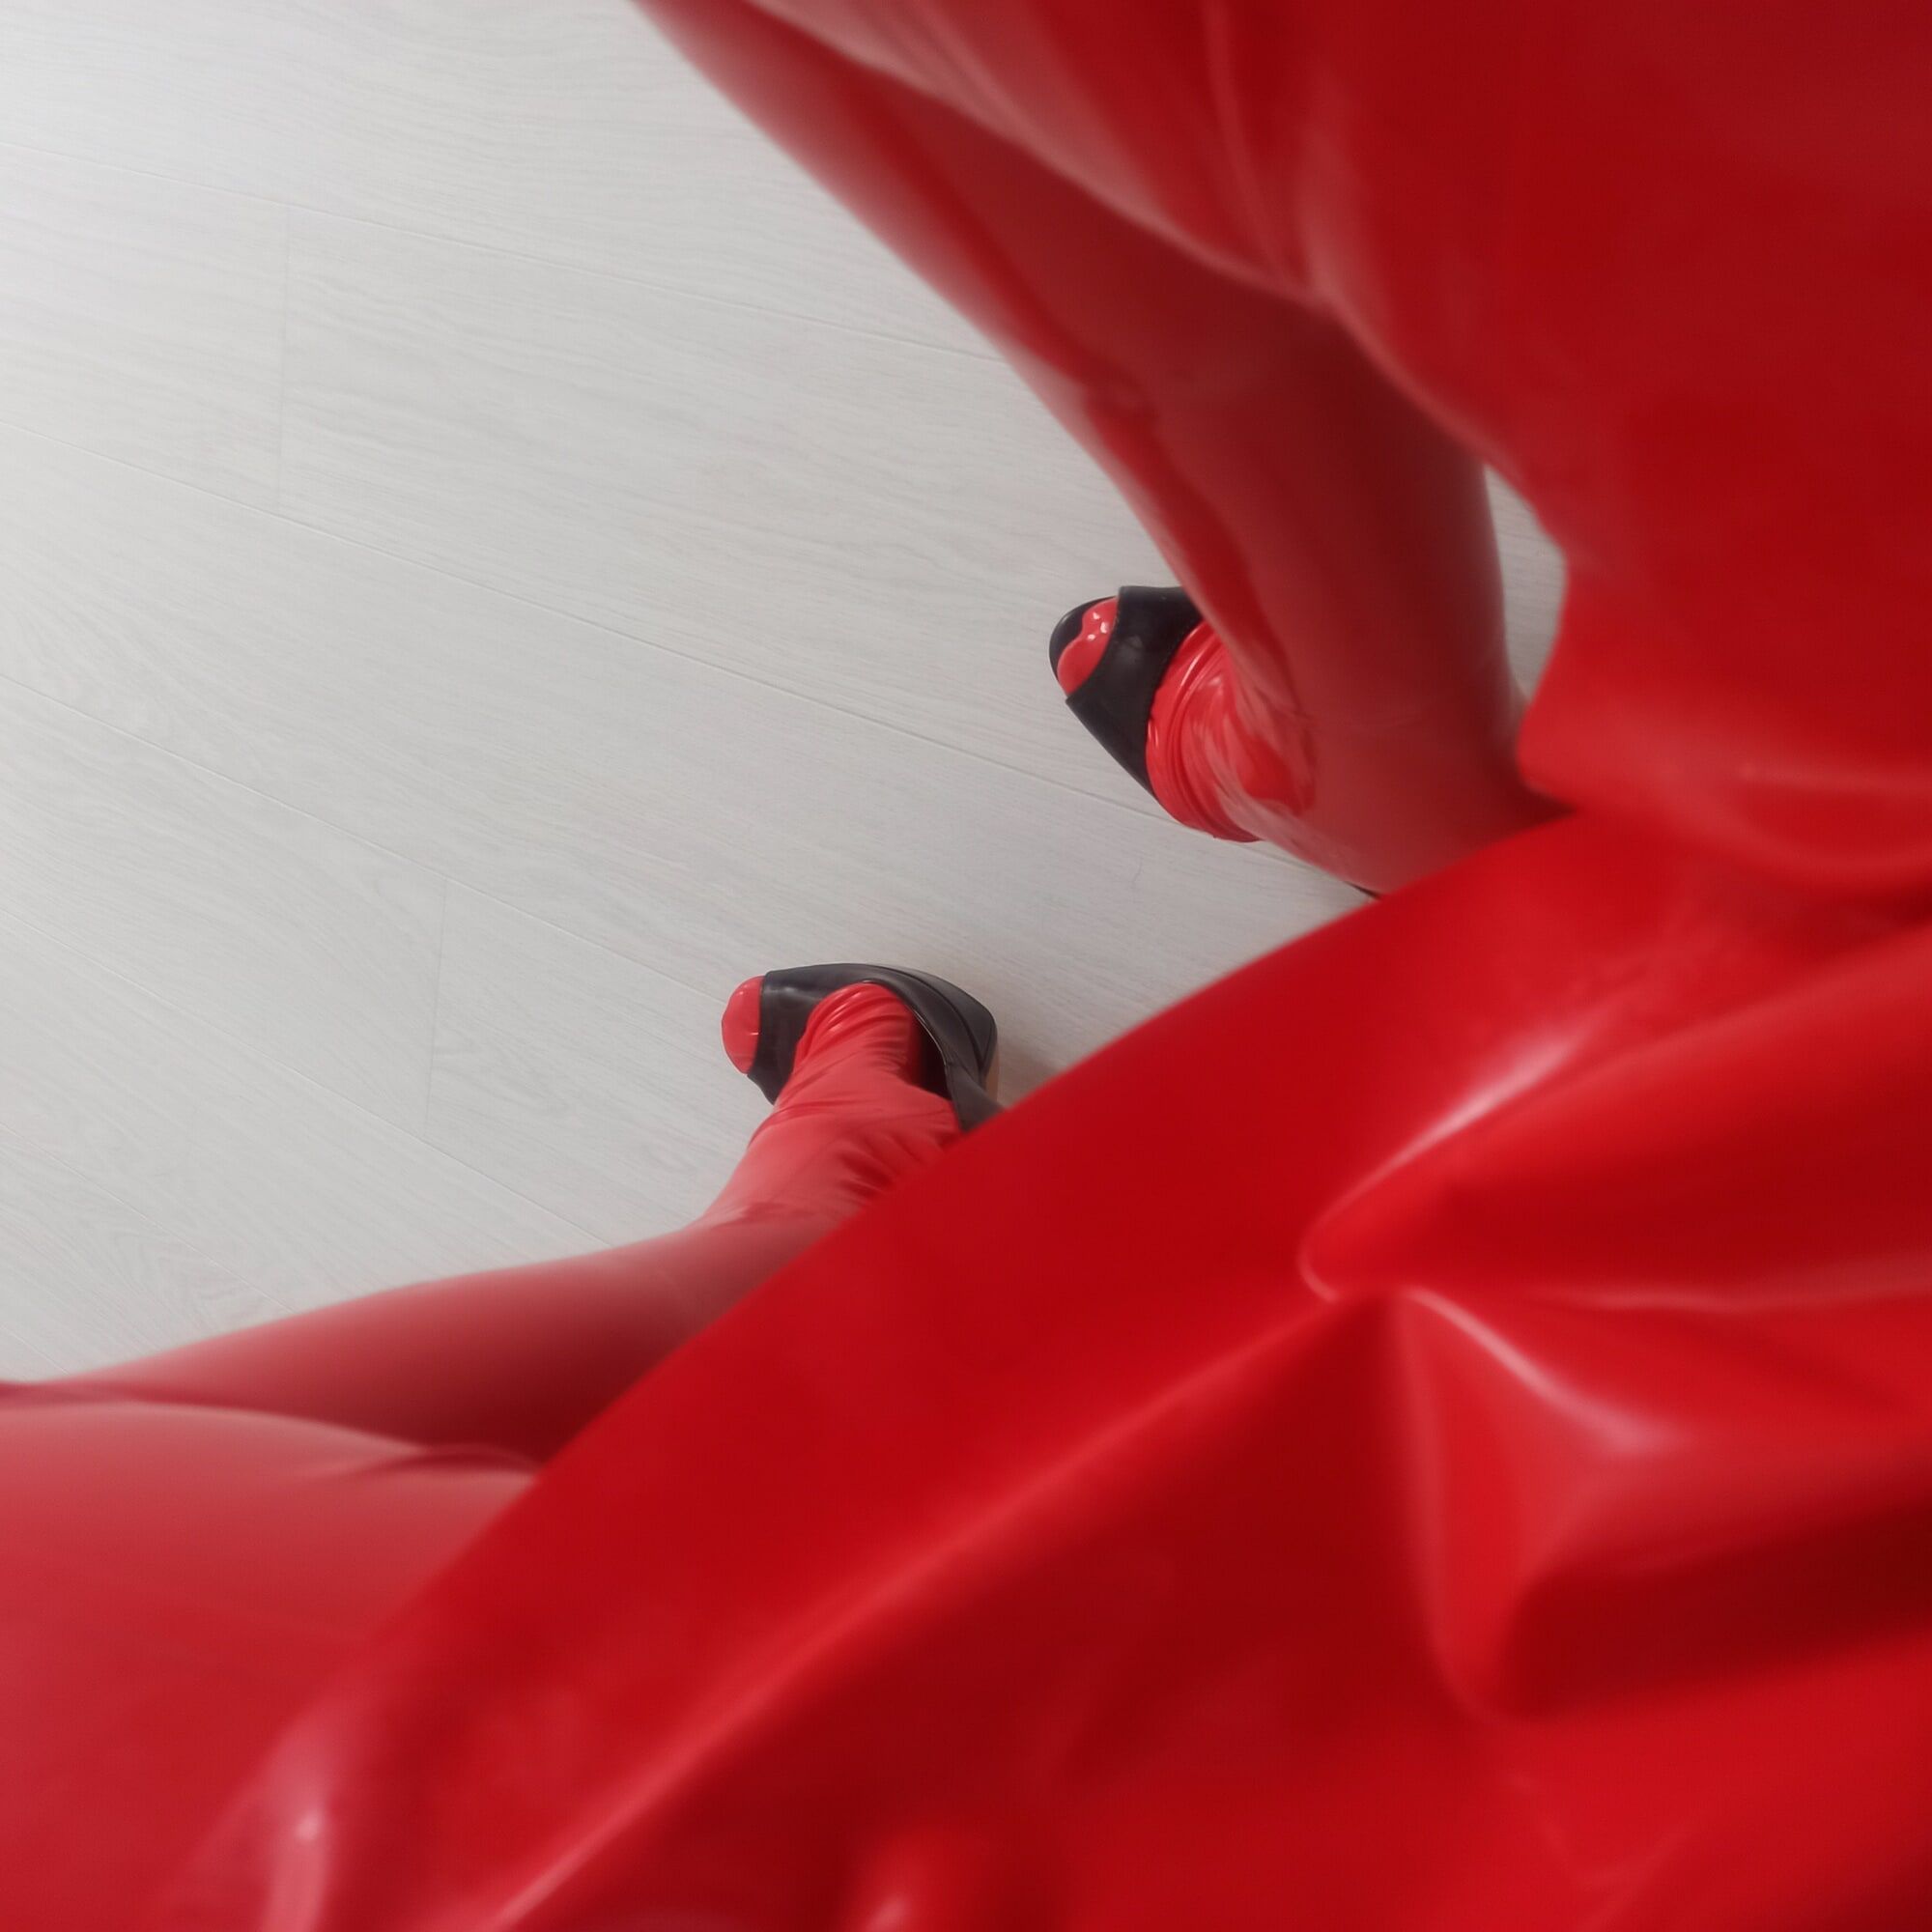 Red latex and high heels. #2